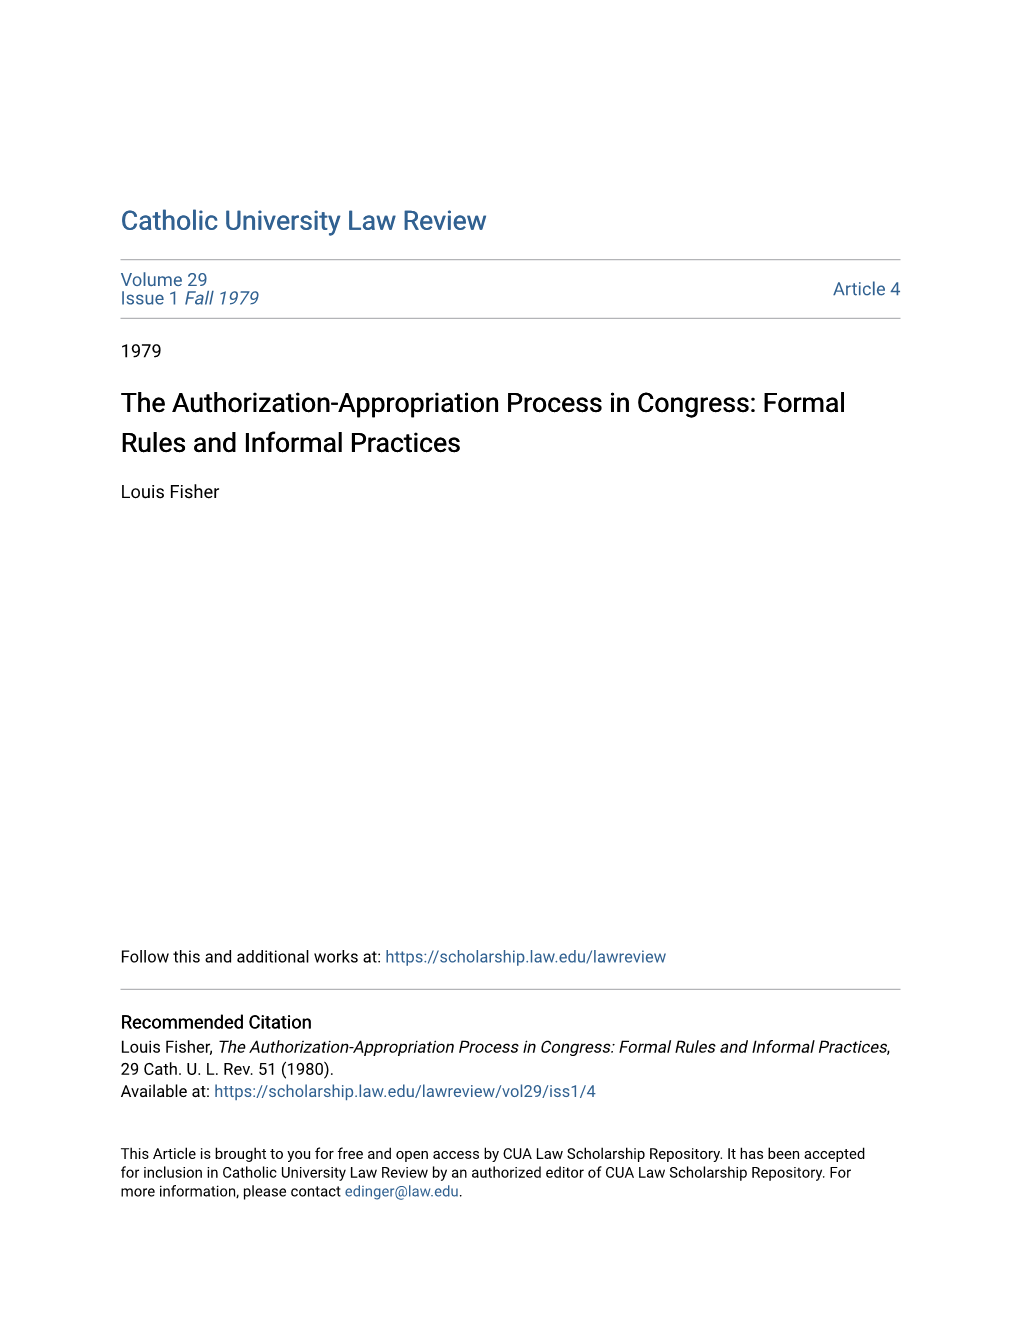 The Authorization-Appropriation Process in Congress: Formal Rules and Informal Practices